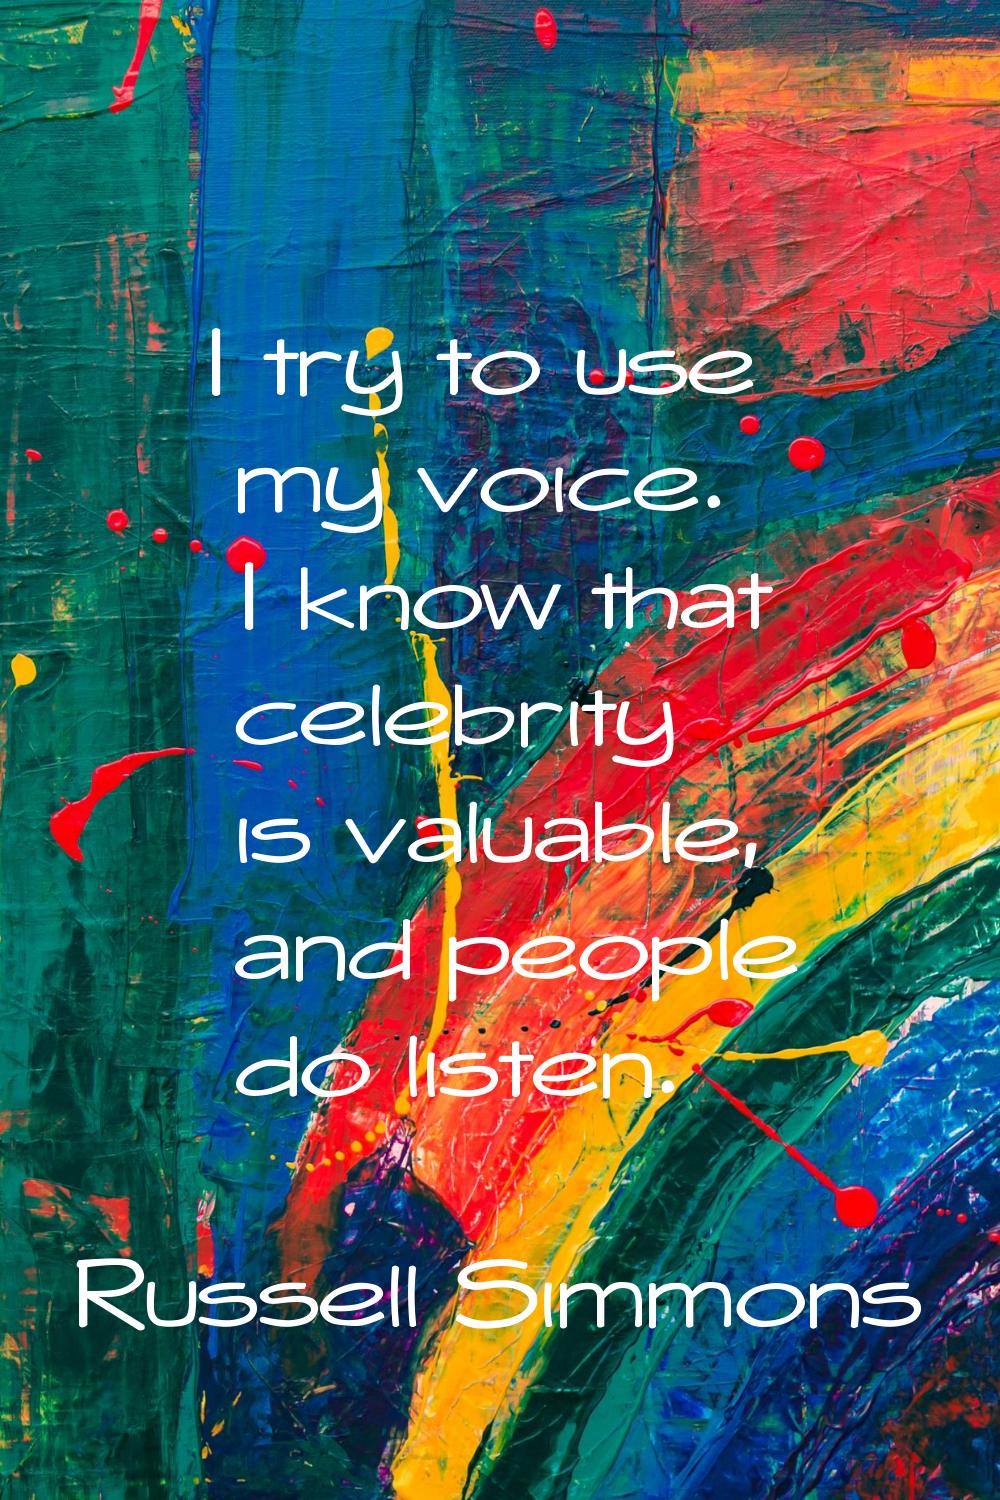 I try to use my voice. I know that celebrity is valuable, and people do listen.